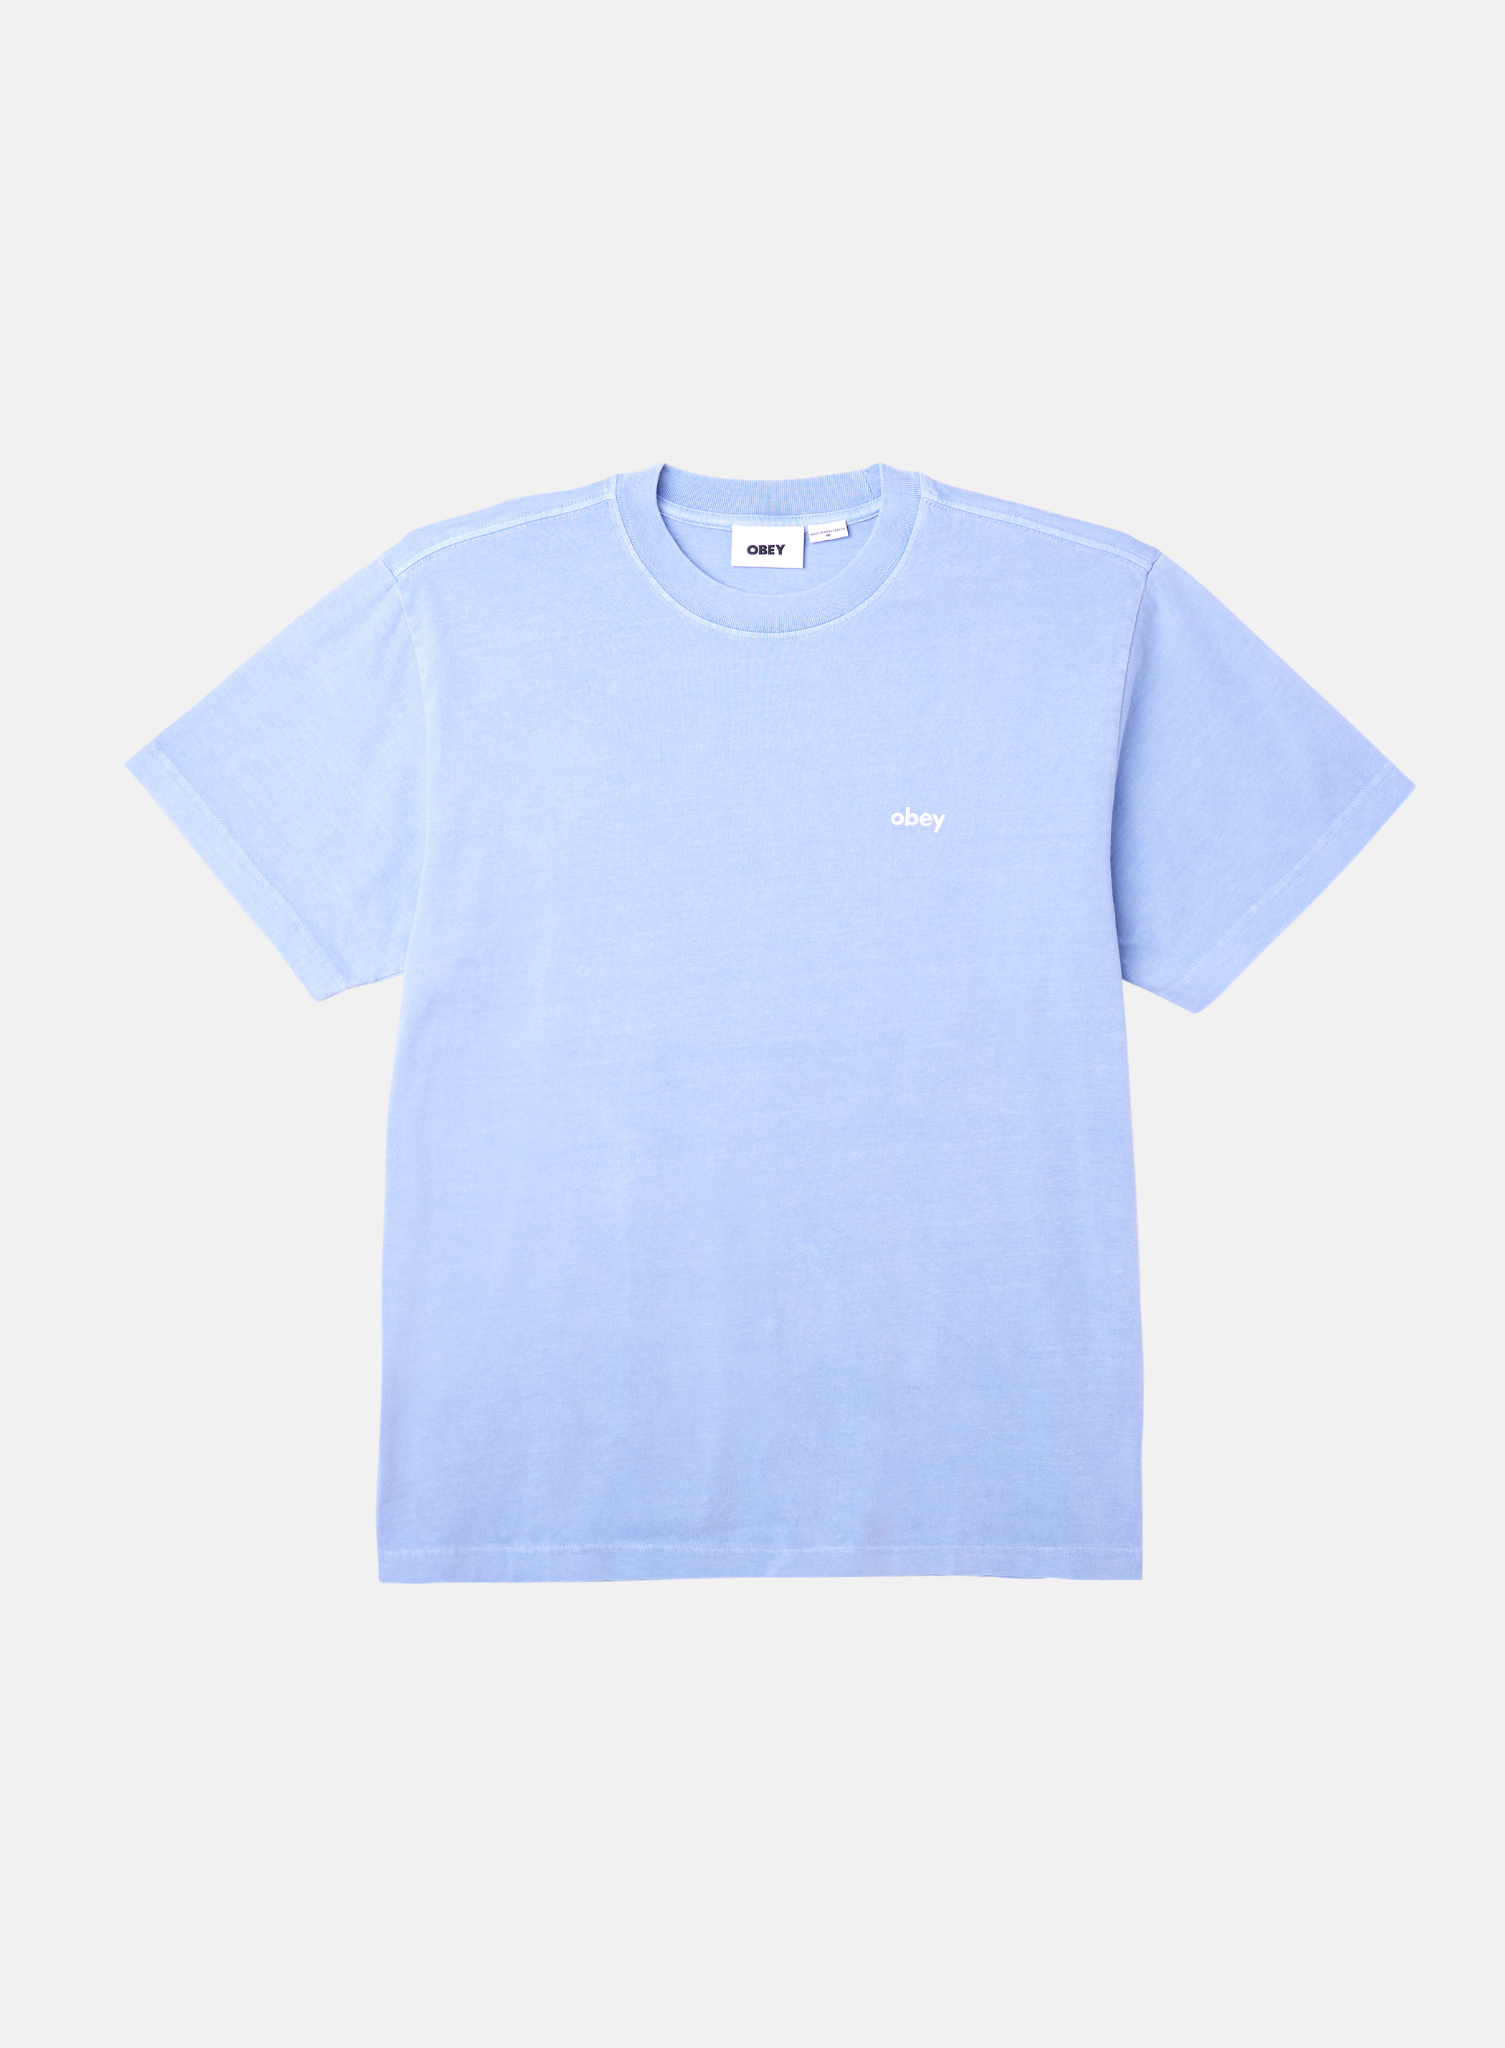 Lowercase Pig. Dyed Tee Blue